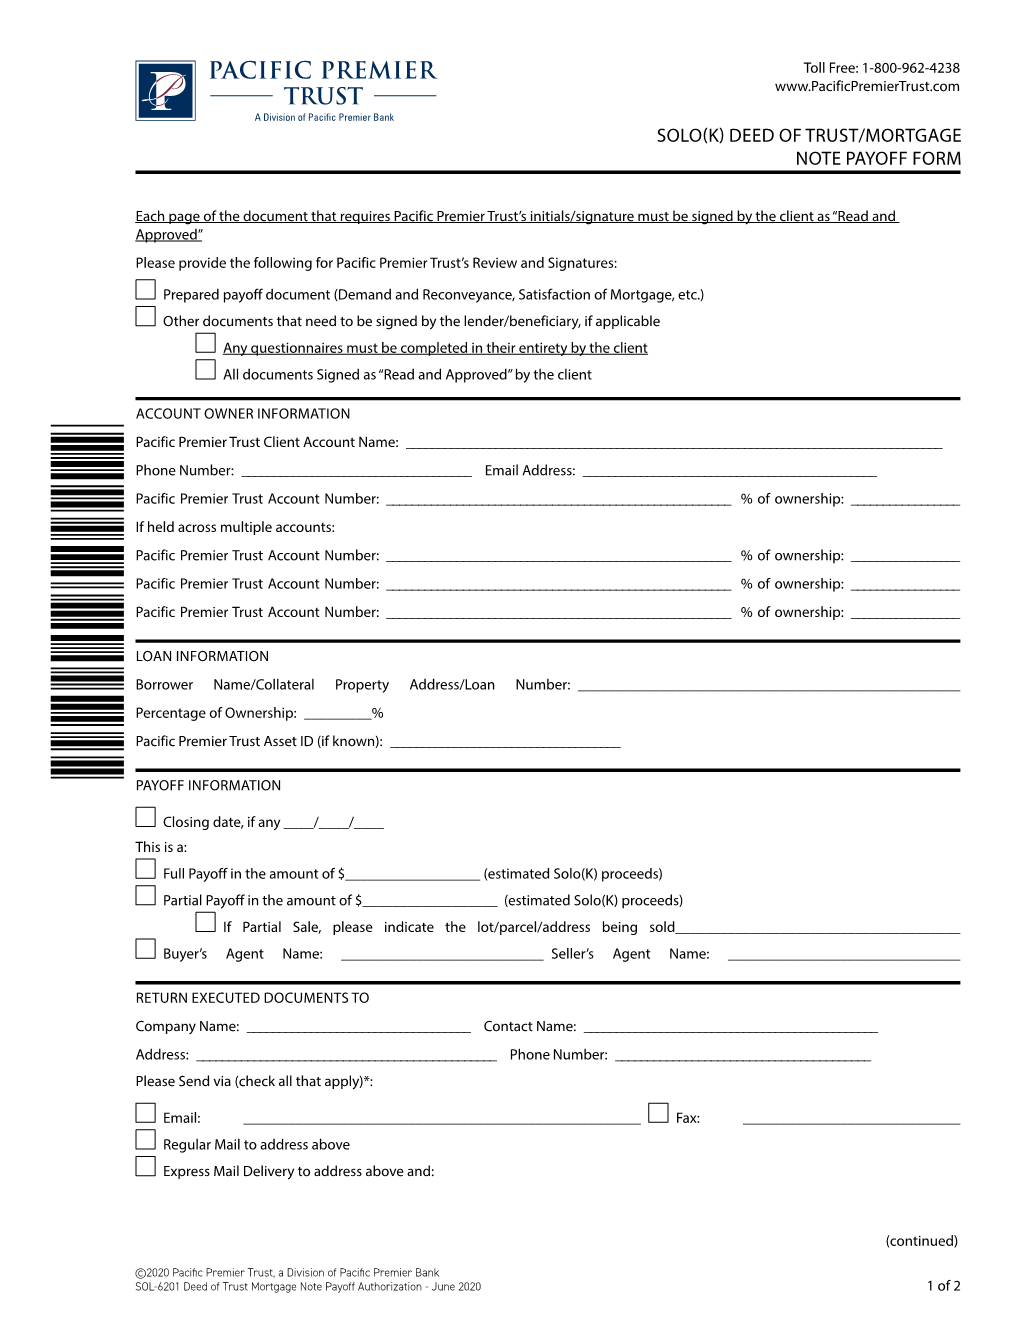 Solo(K) Deed of Trust/Mortgage Note Payoff Form